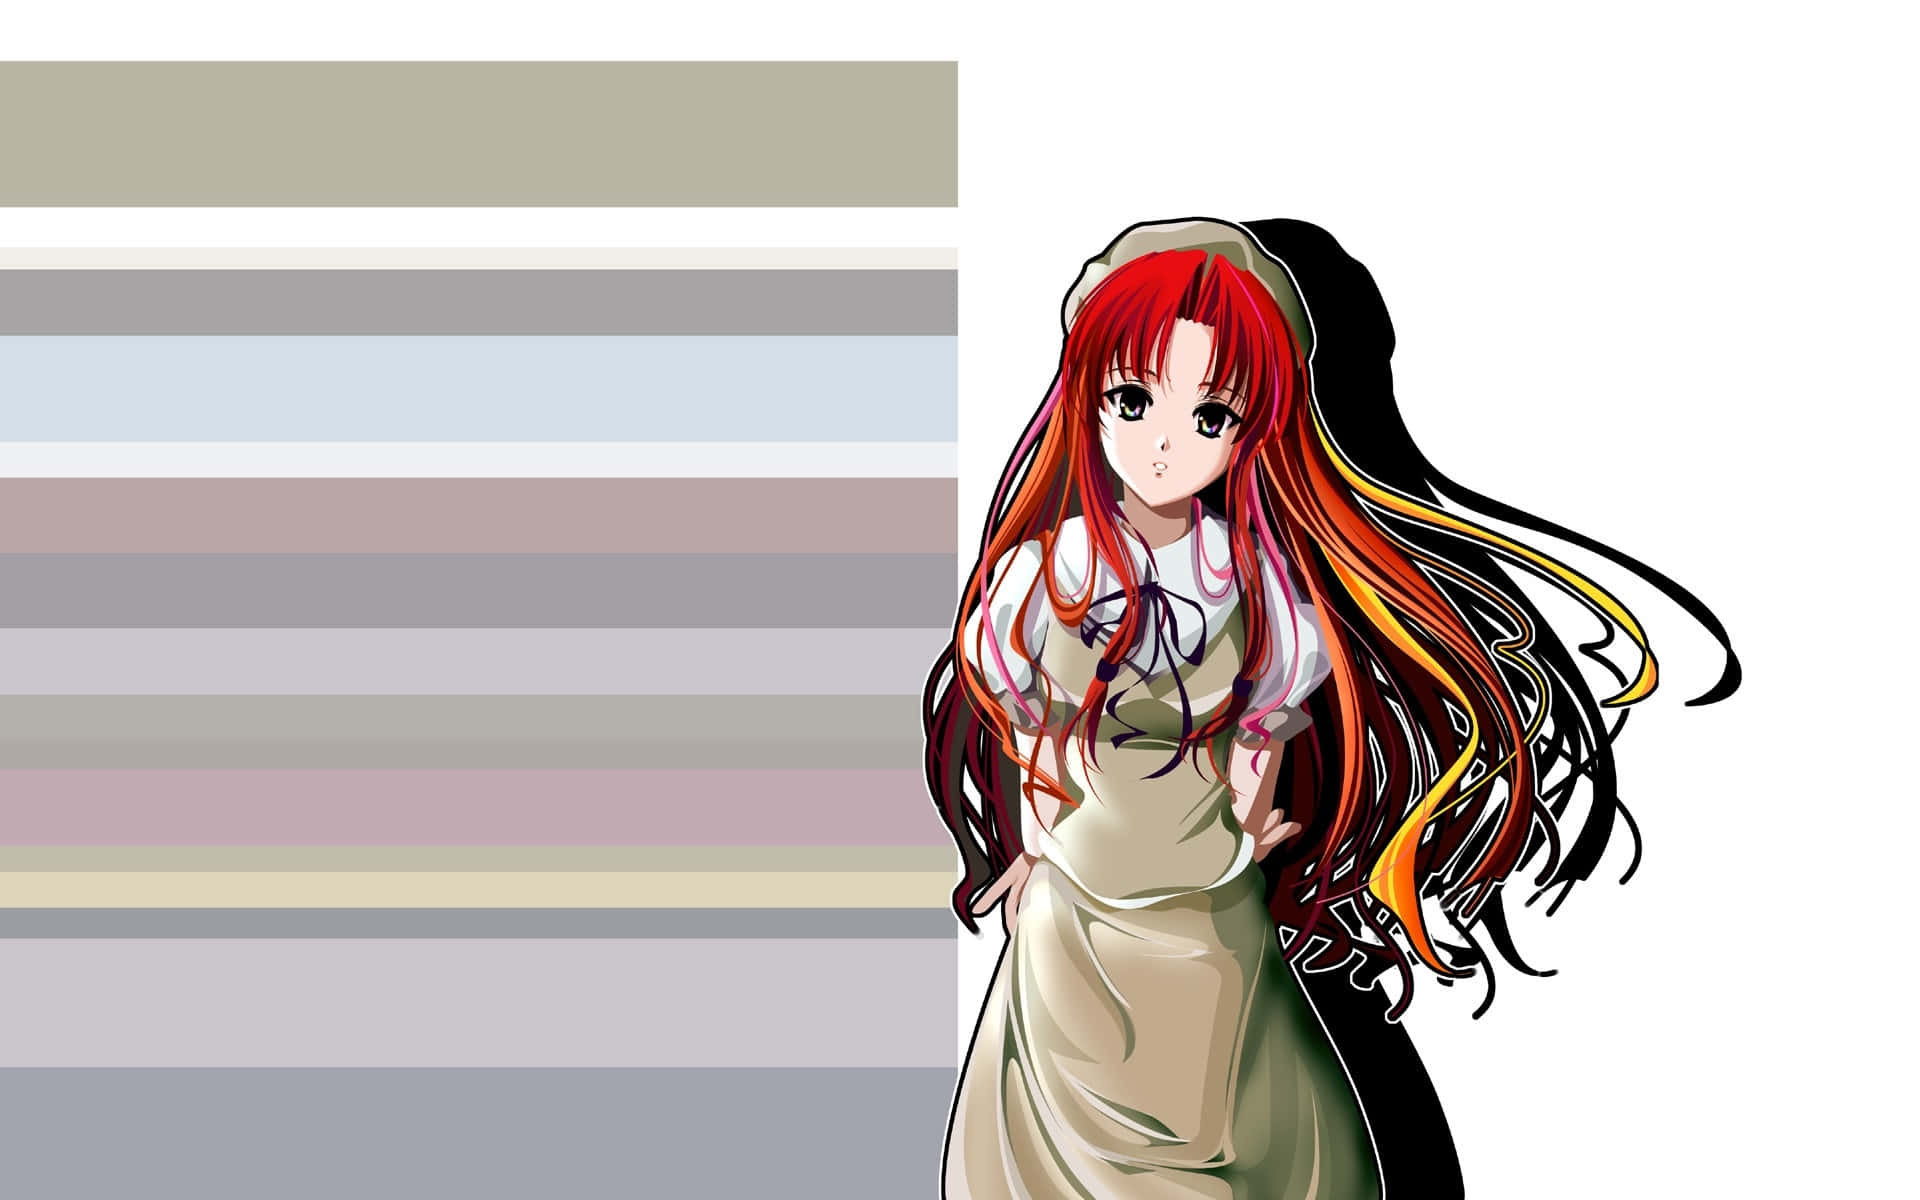 Red Haired Anime Character Illustration Wallpaper